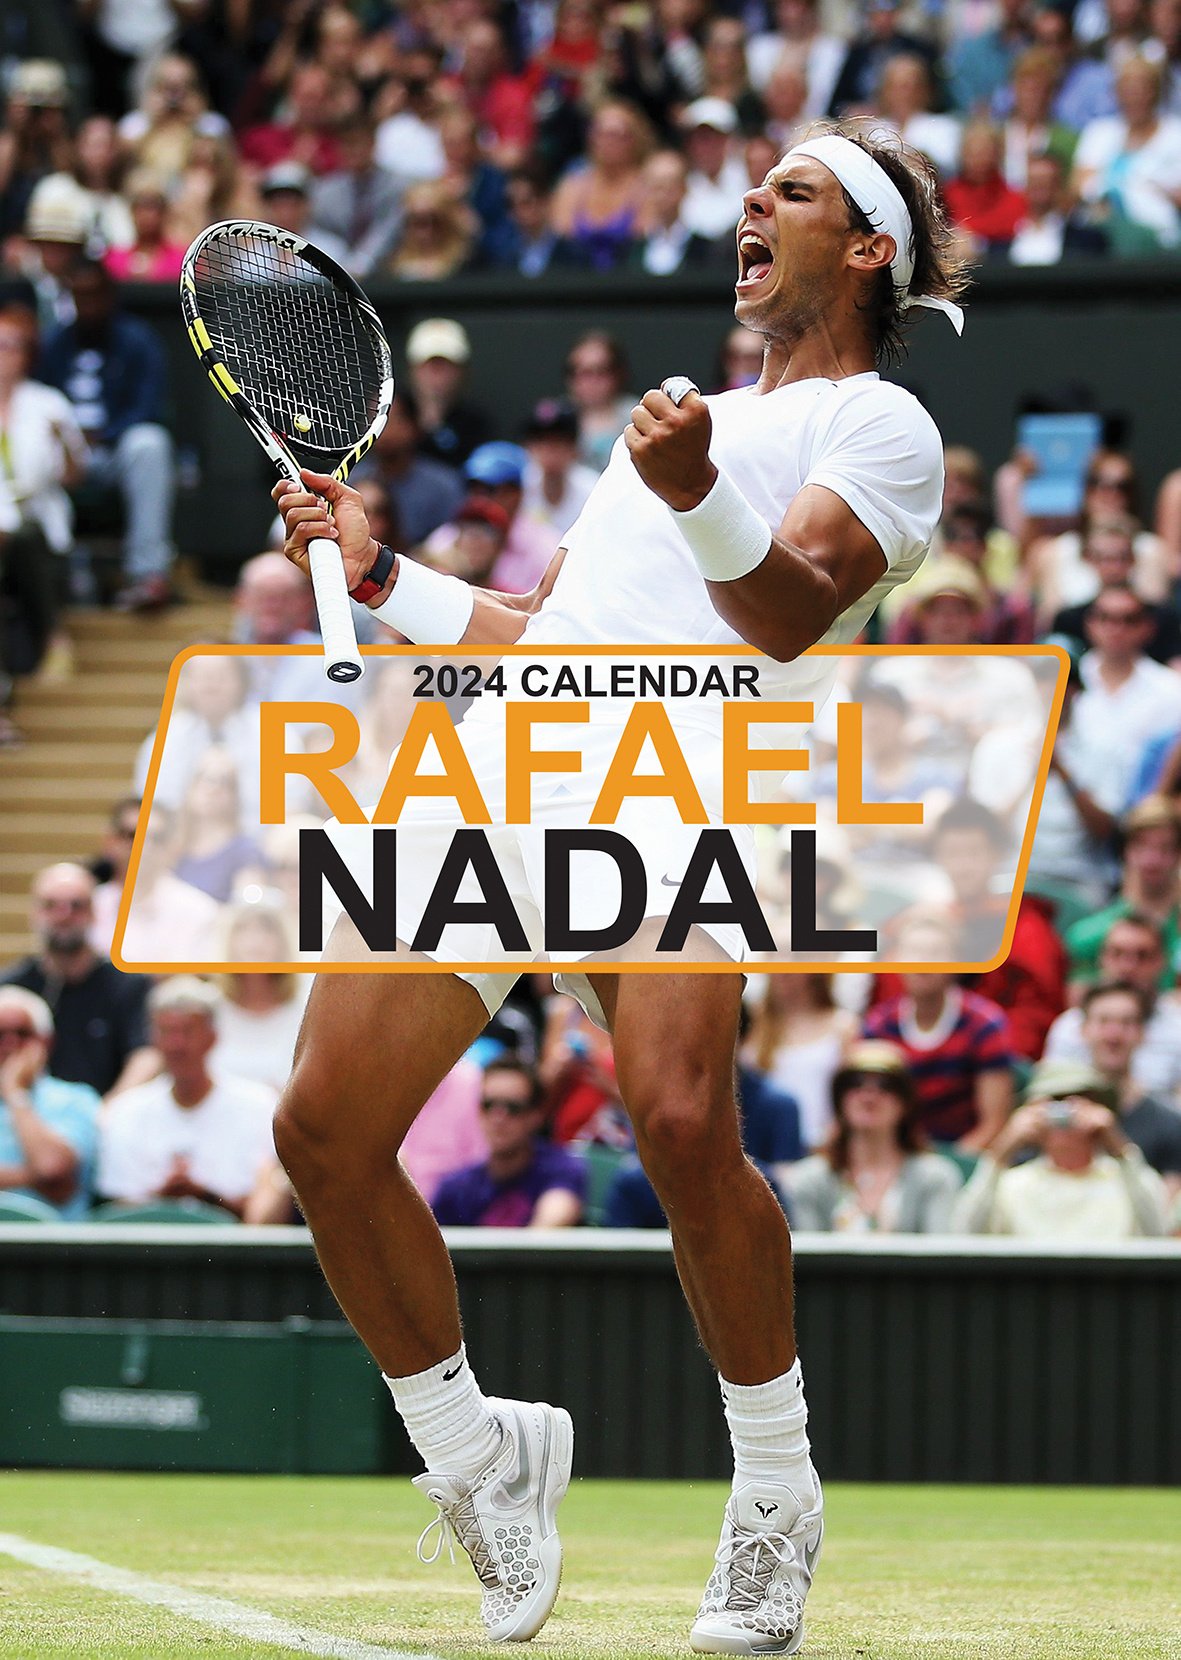 Buying Rafael Nadal Calendar 2024? Quick and easy online